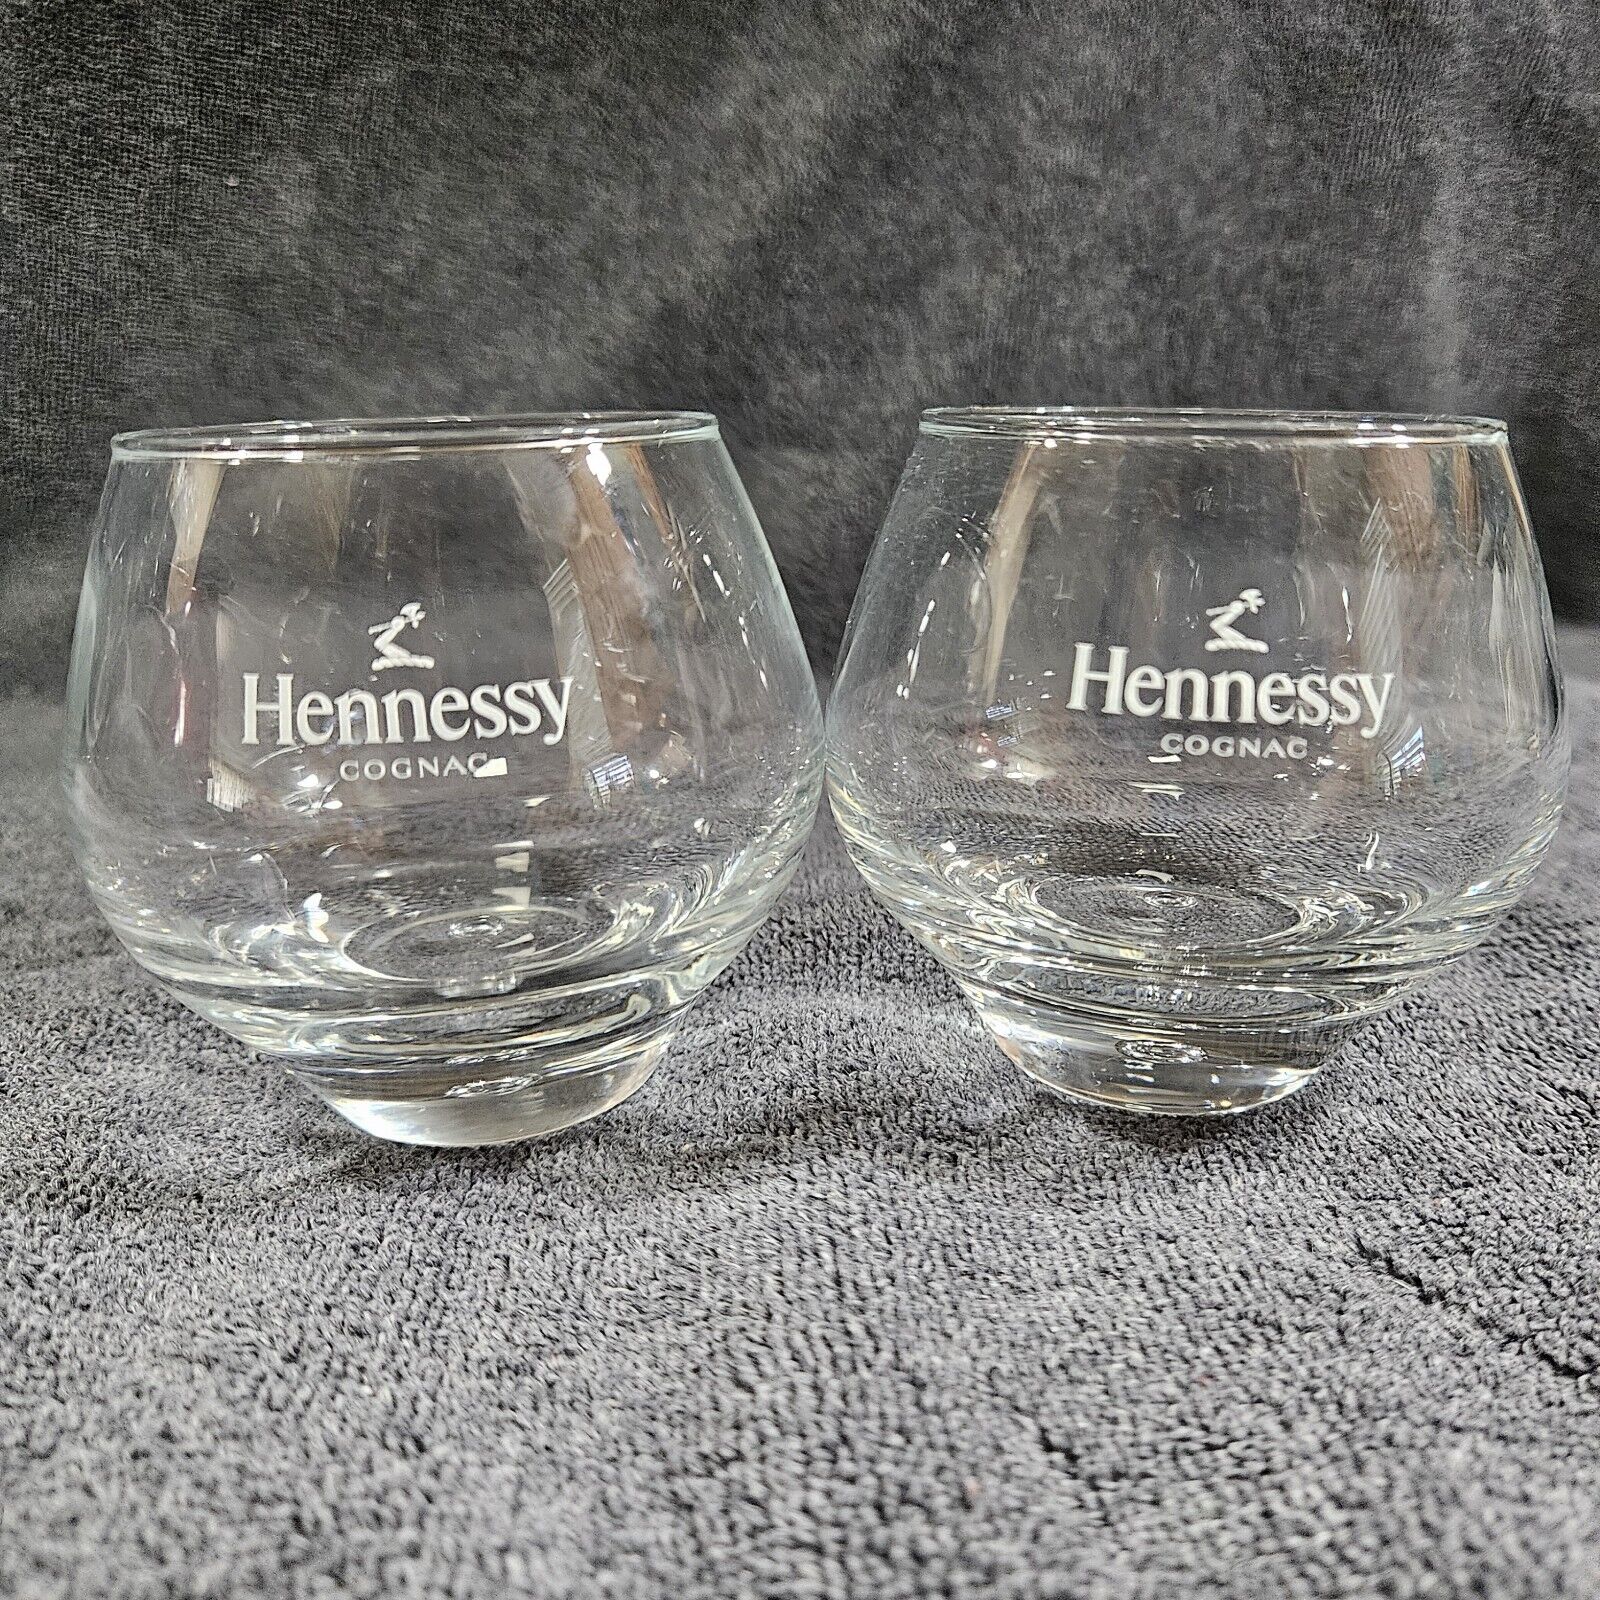 Set of 2 - Hennessy Cognac Snifter Glass 3 1/2 Floating Bubble In Bottom